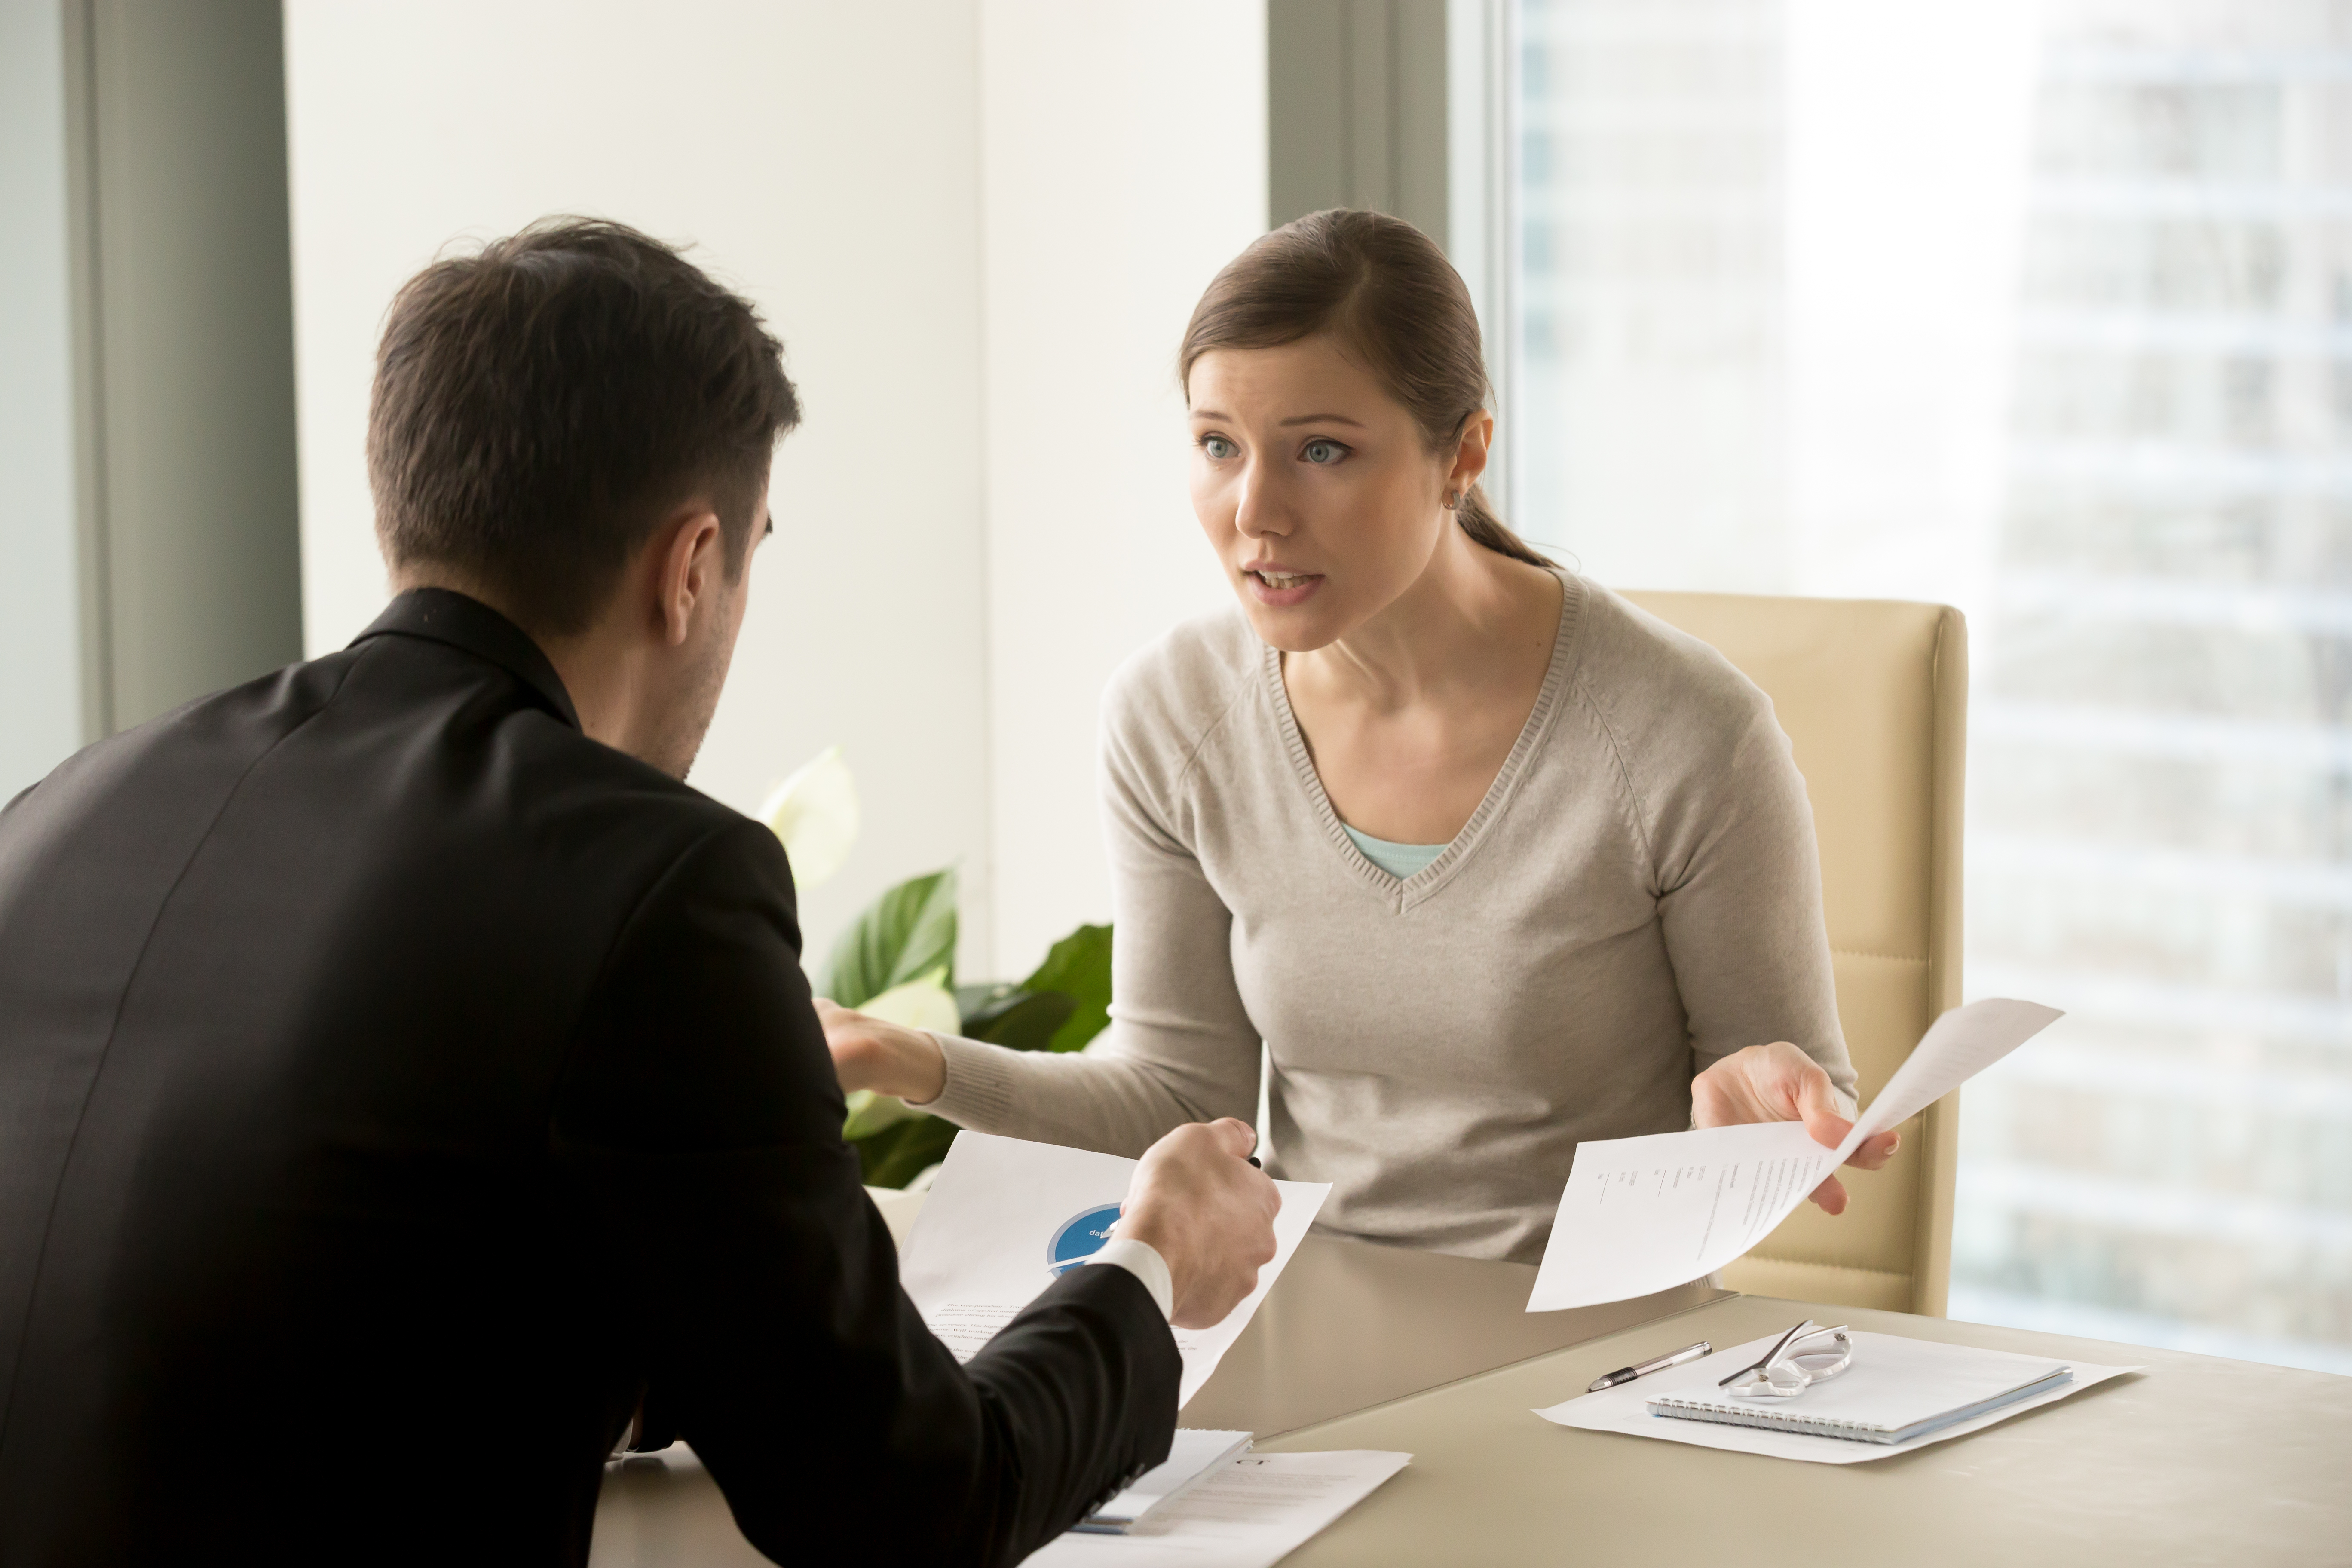 A woman arguing with a man in an office | Source: Shutterstock